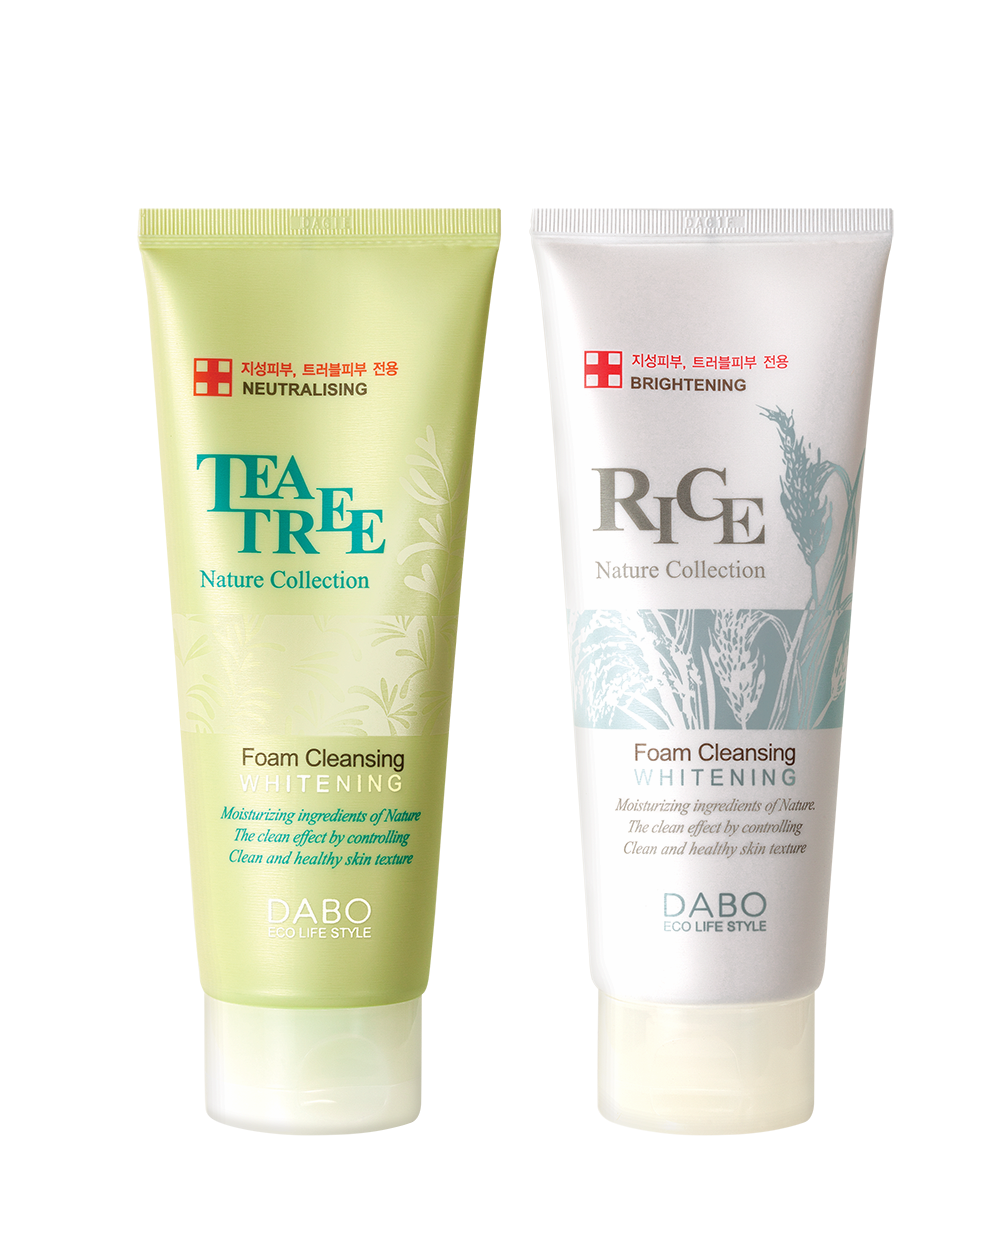 DABO Foam Cleansing Natural Collection_Rice_Tea tree_